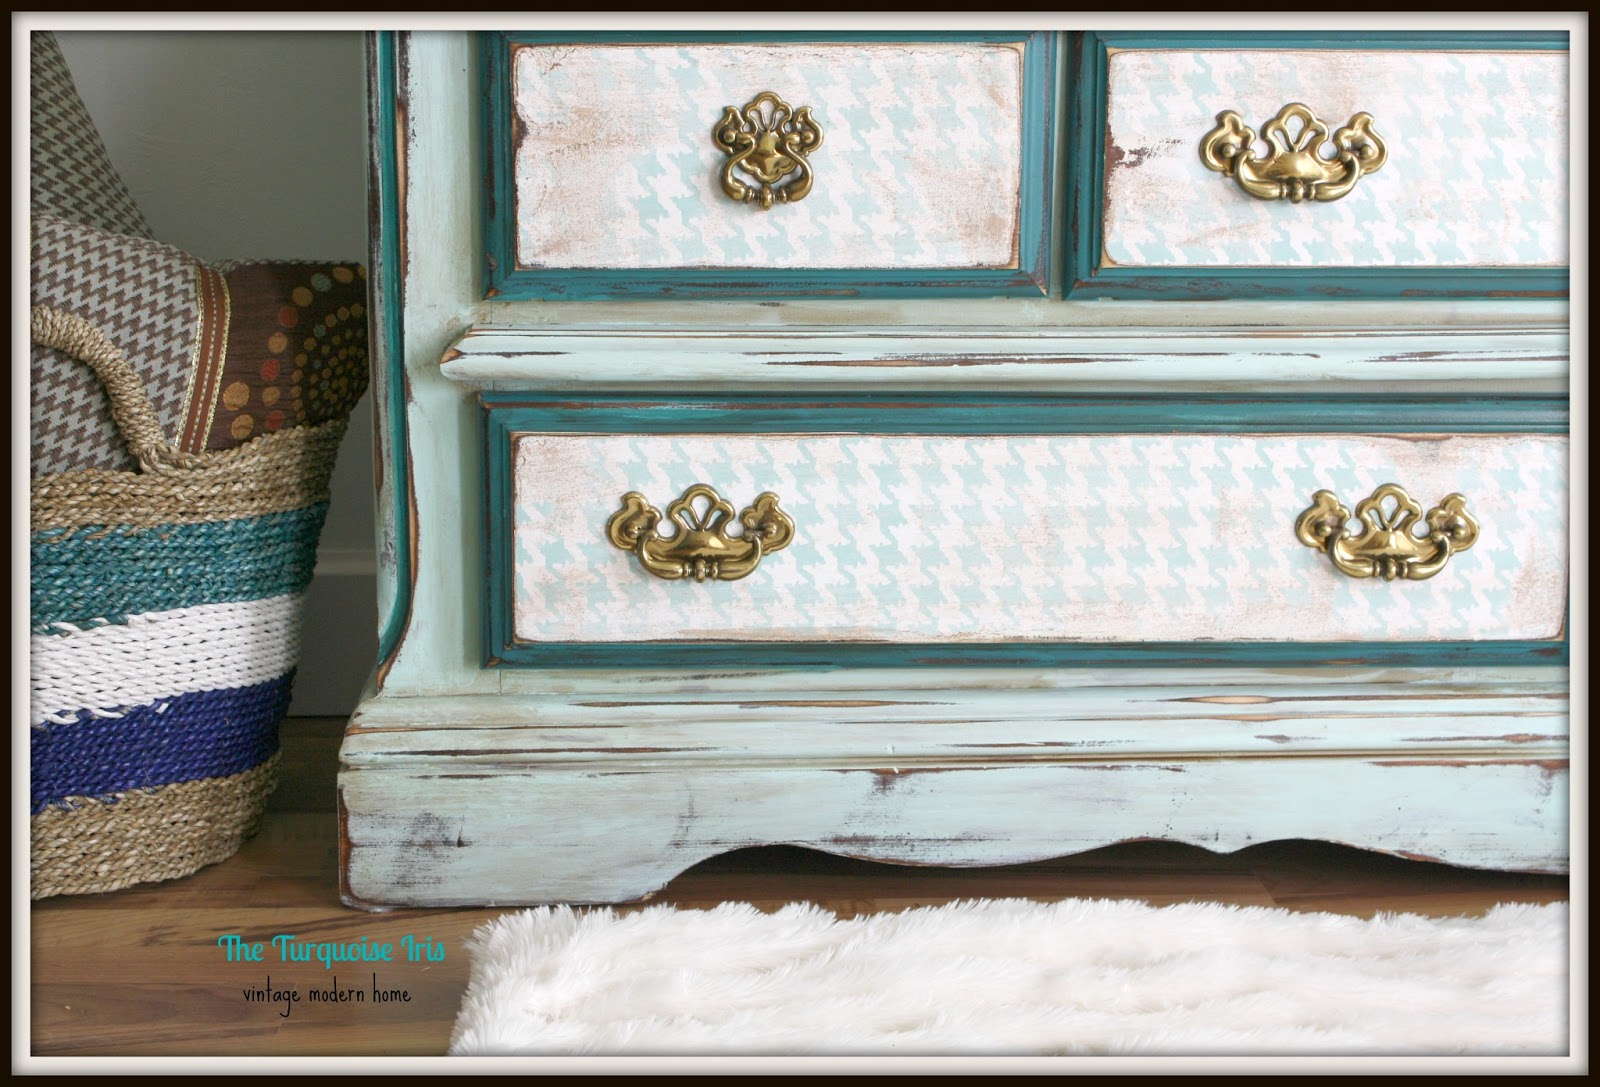 The Turquoise Iris Furniture Art Hounds Tooth Dresser In